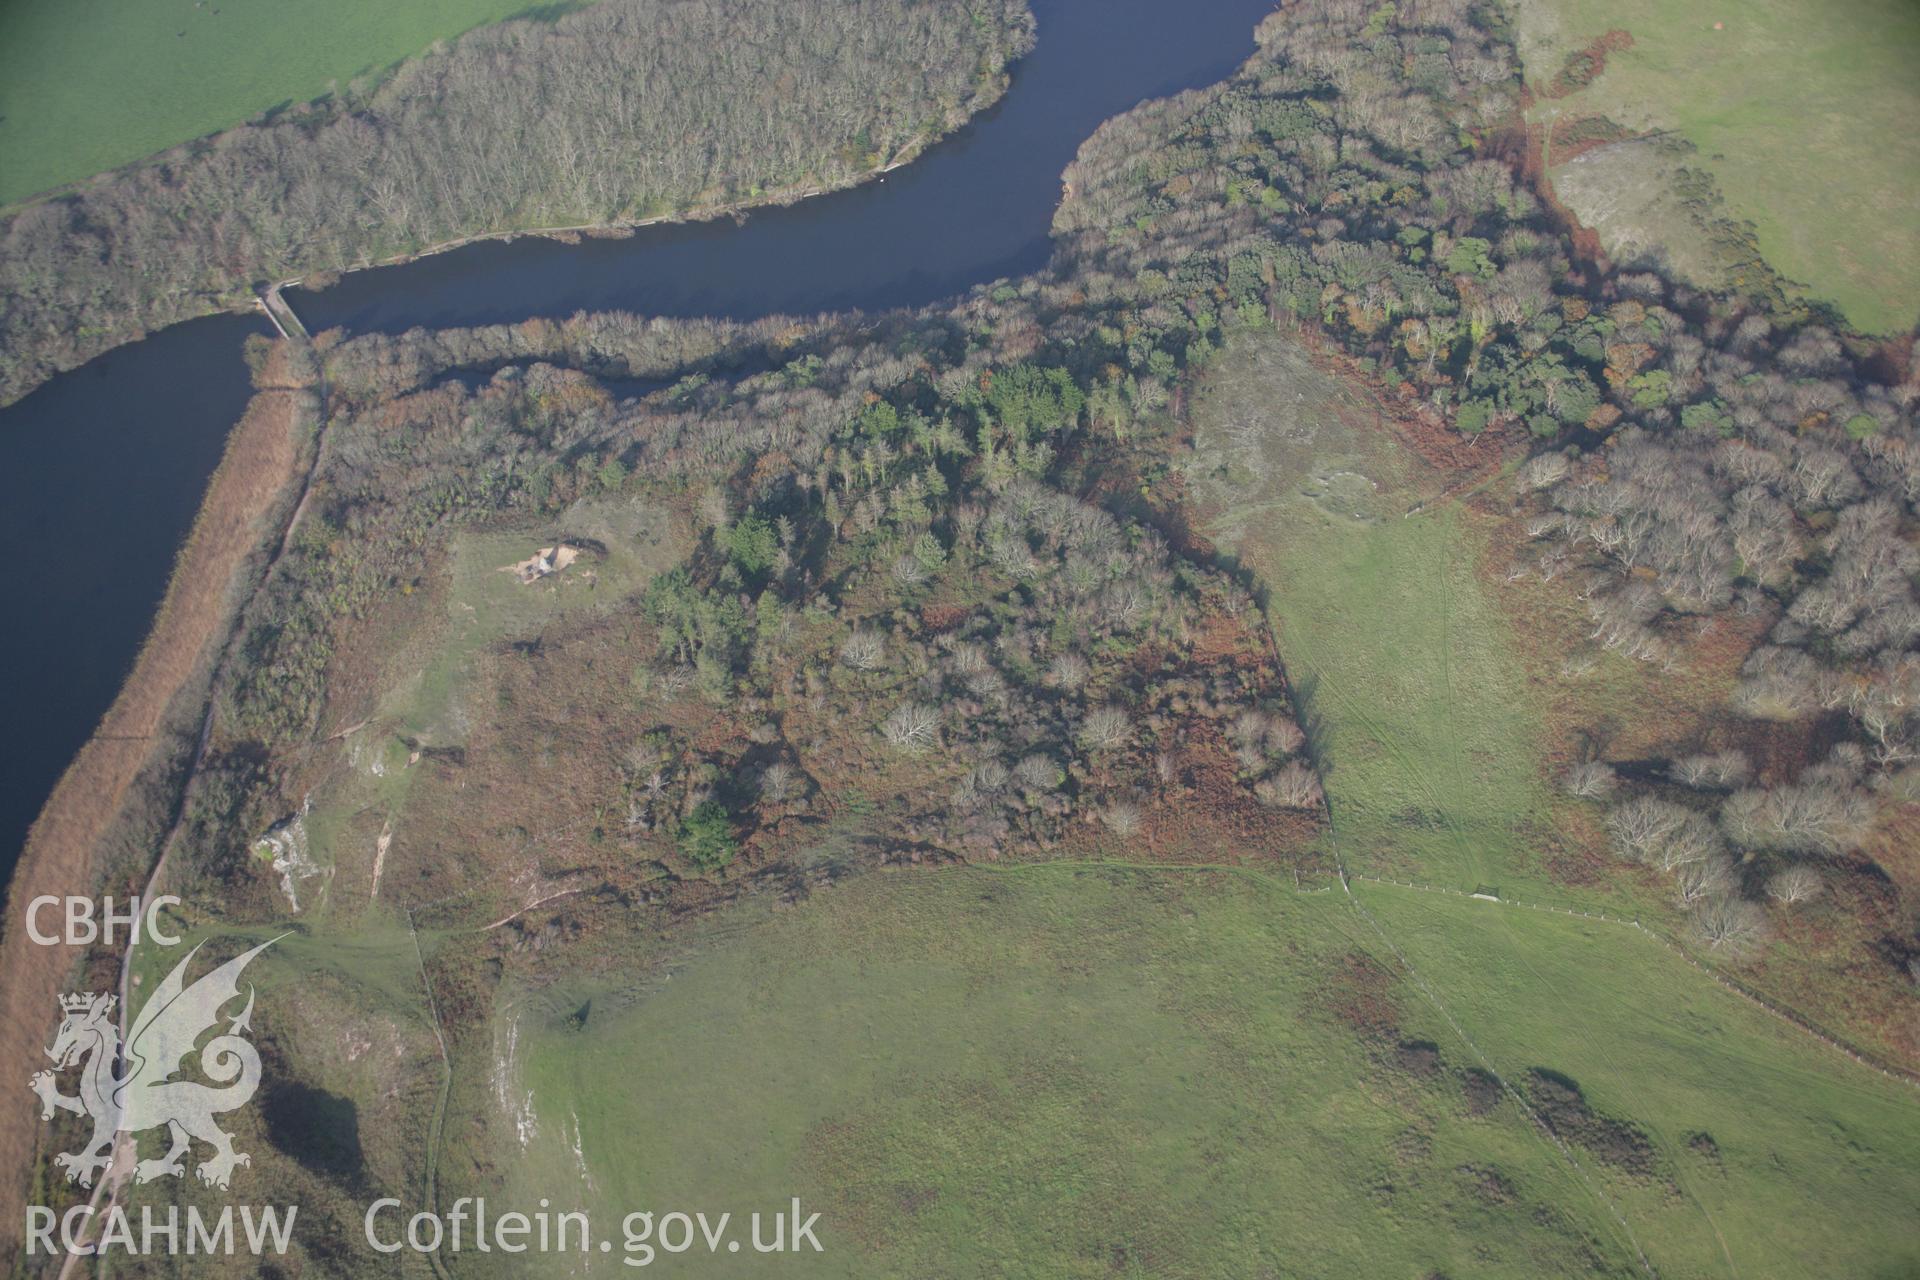 RCAHMW colour oblique aerial photograph of Stackpole Warren 'Ancient Village'. Taken on 19 November 2005 by Toby Driver